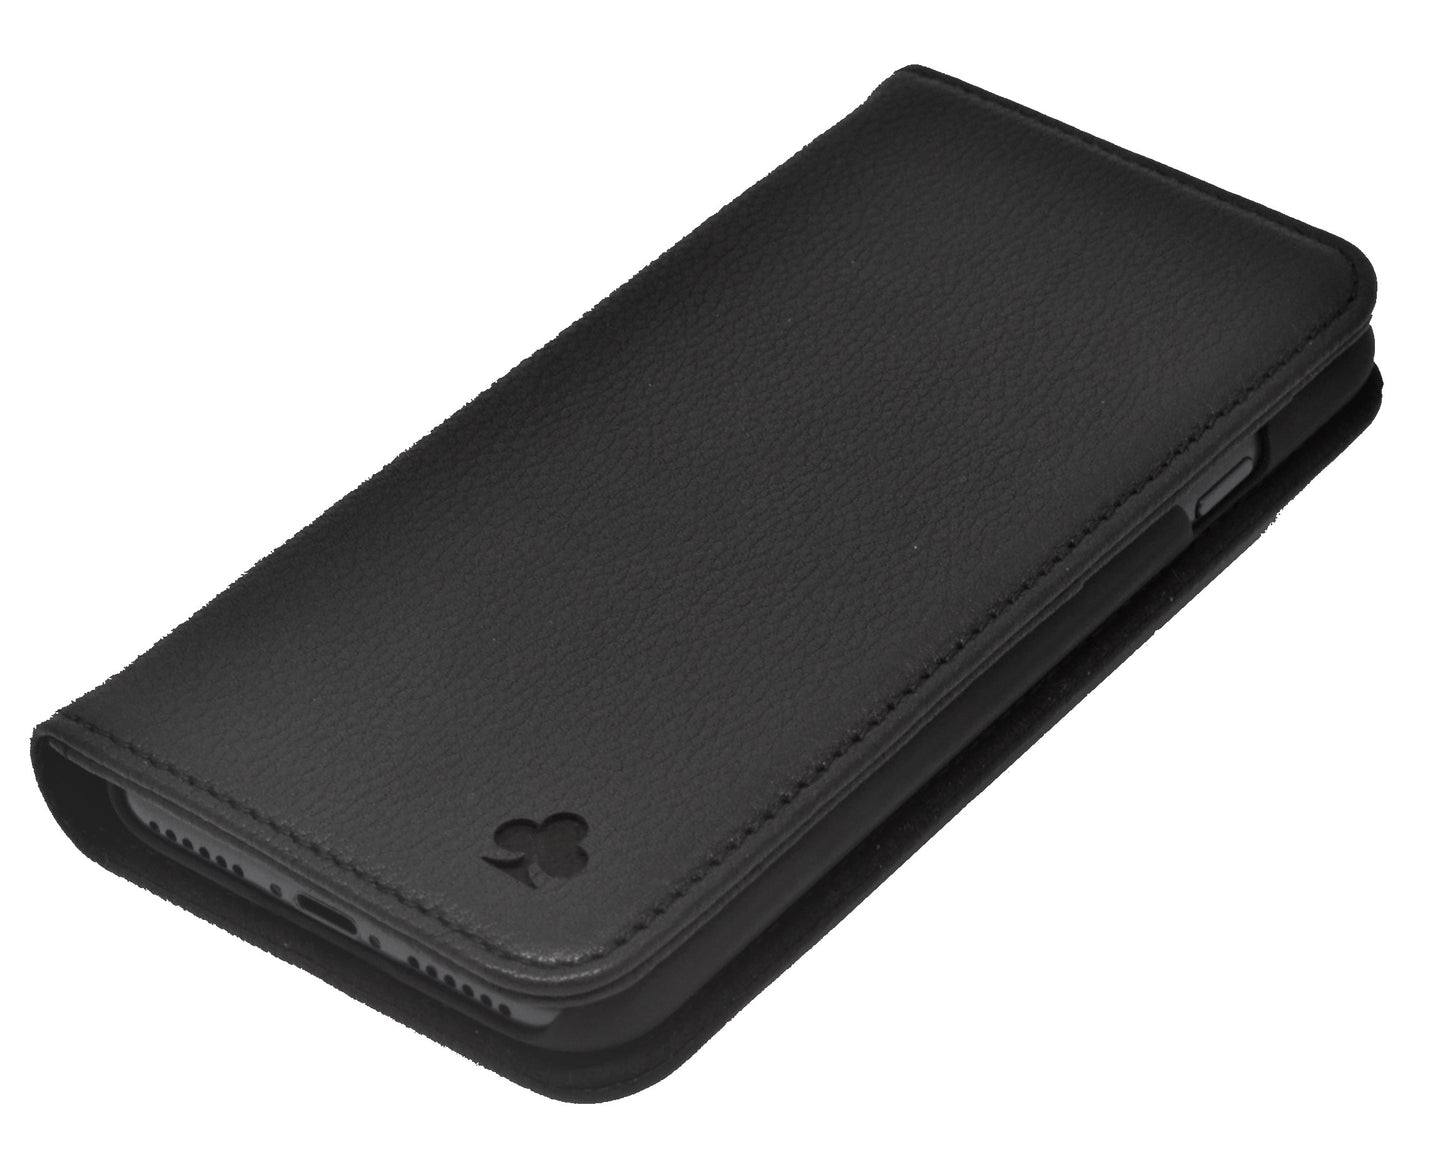 iPhone 12 Pro Max Leather Case. Premium Slim Genuine Leather Stand Case/Cover/Wallet (Black)